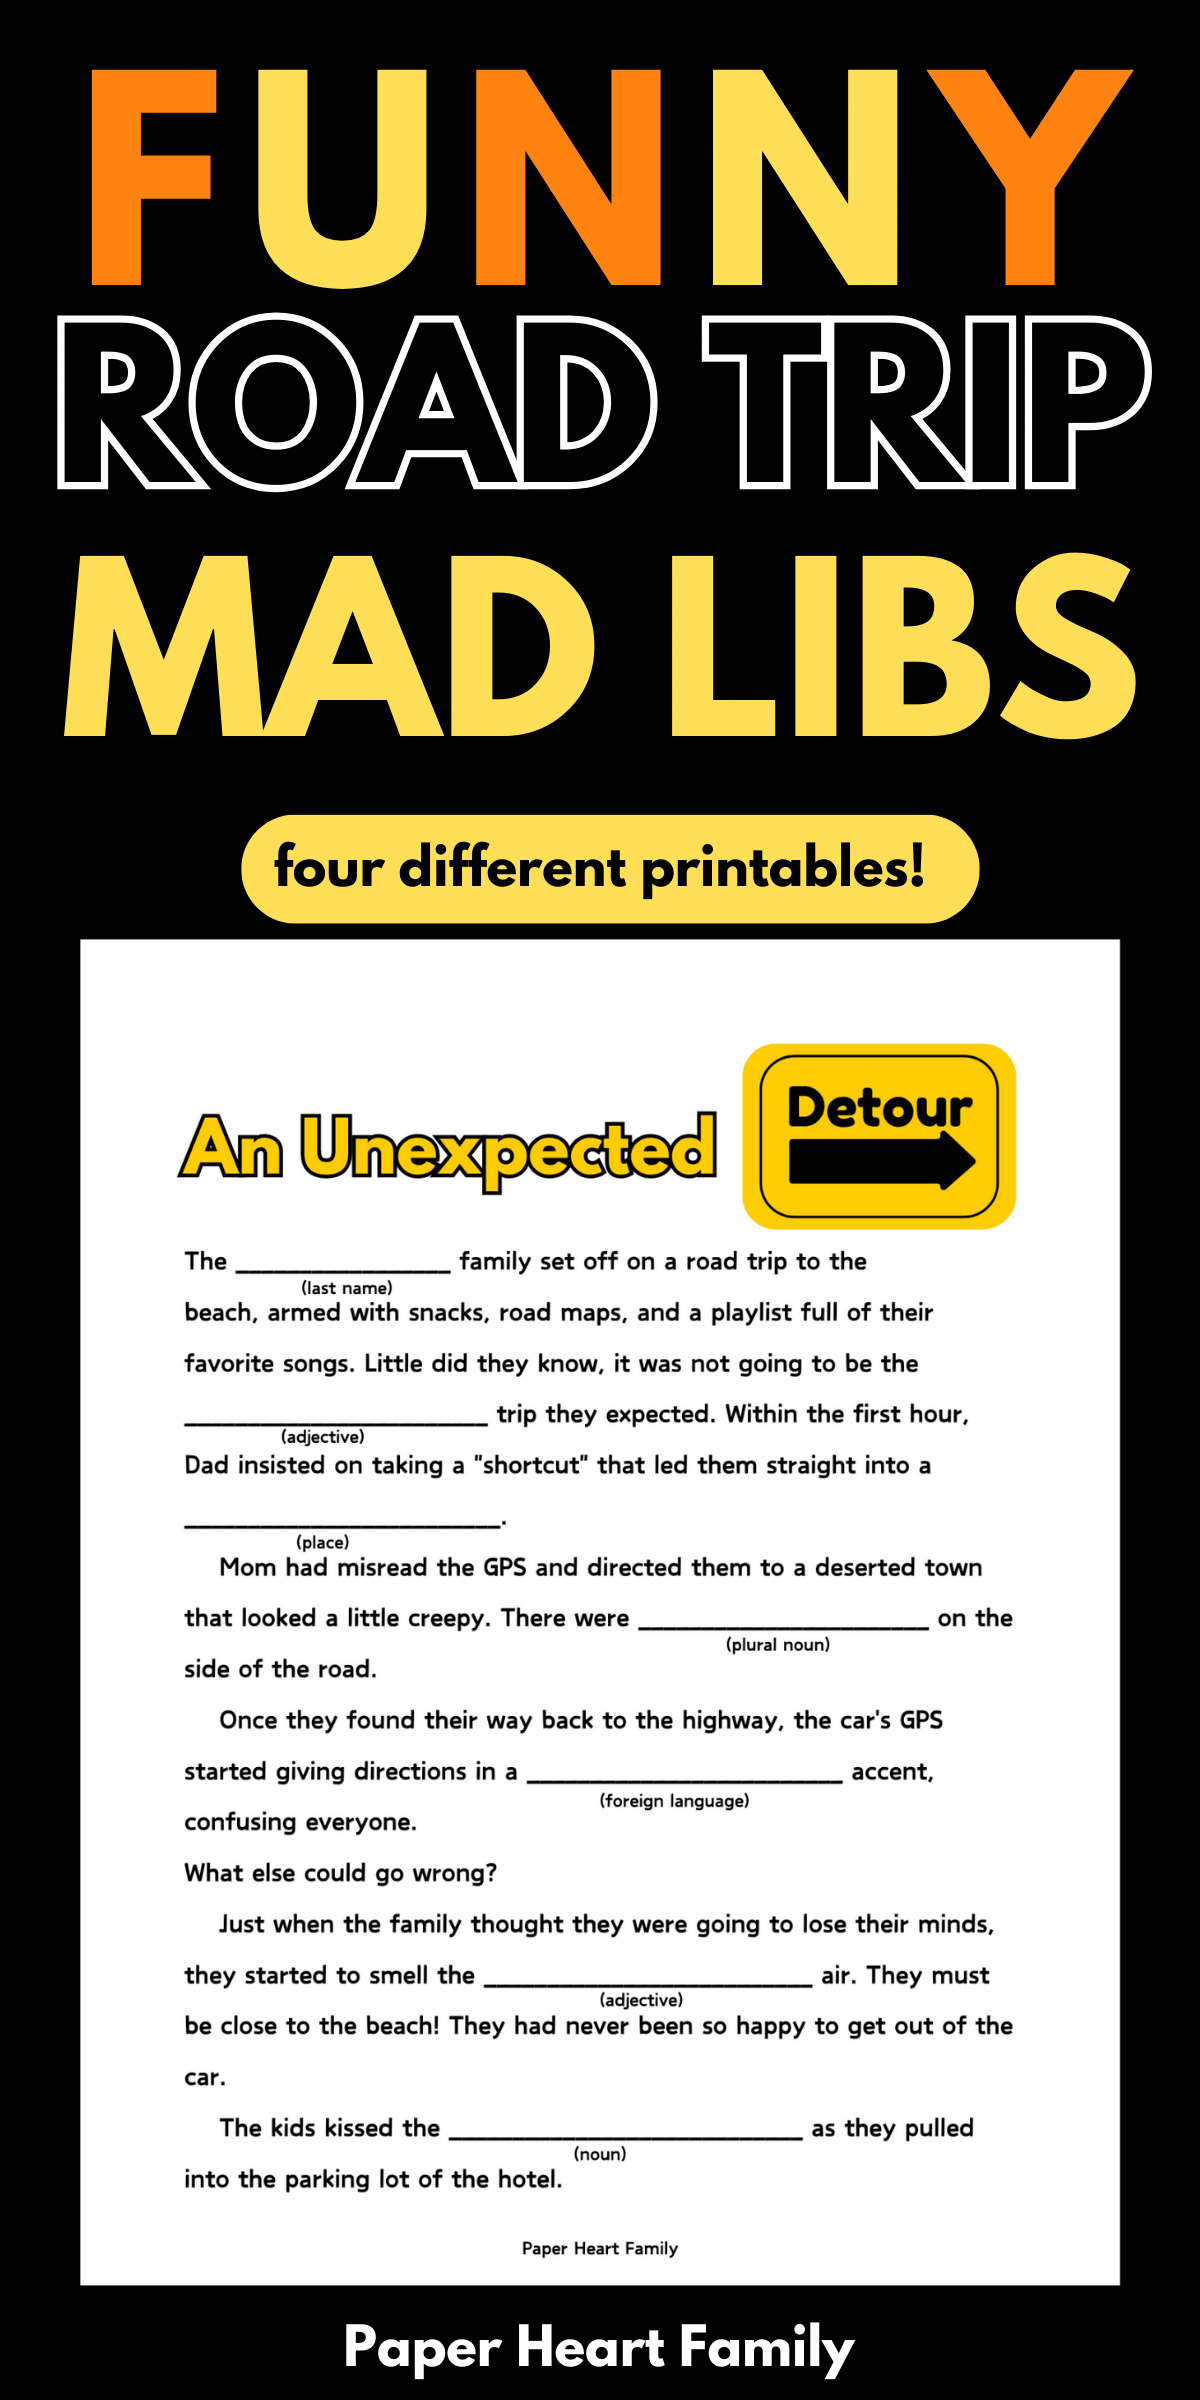 Picture of "An Unexpected Detour" Mad Lib